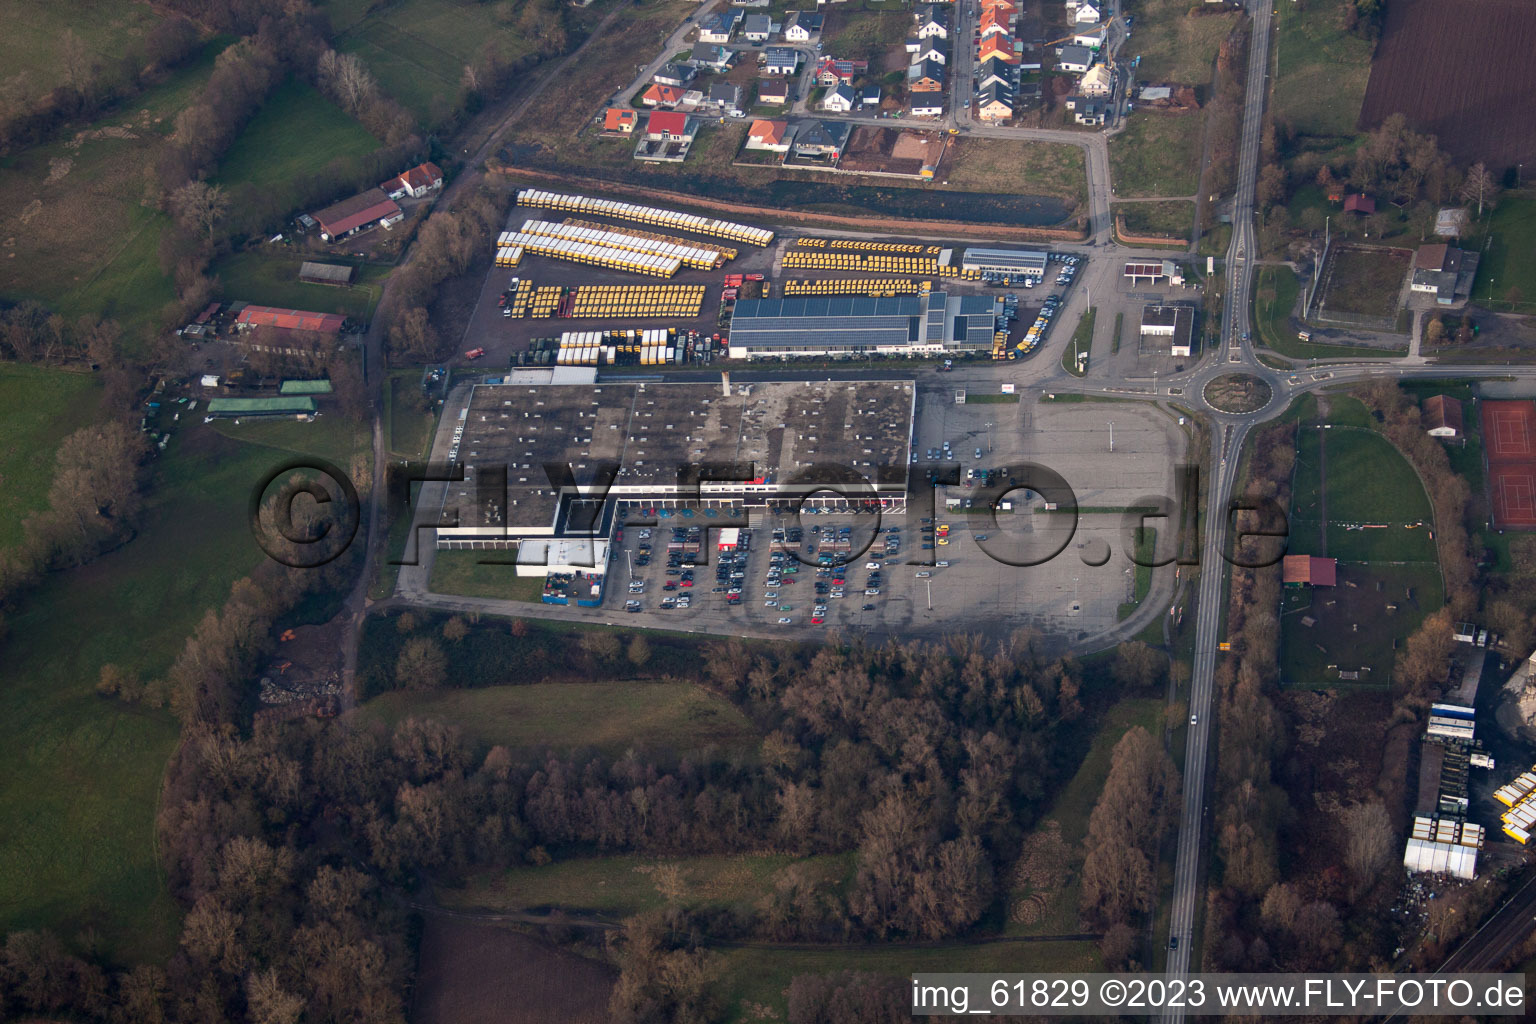 Industrial Estate in Rohrbach in the state Rhineland-Palatinate, Germany seen from above